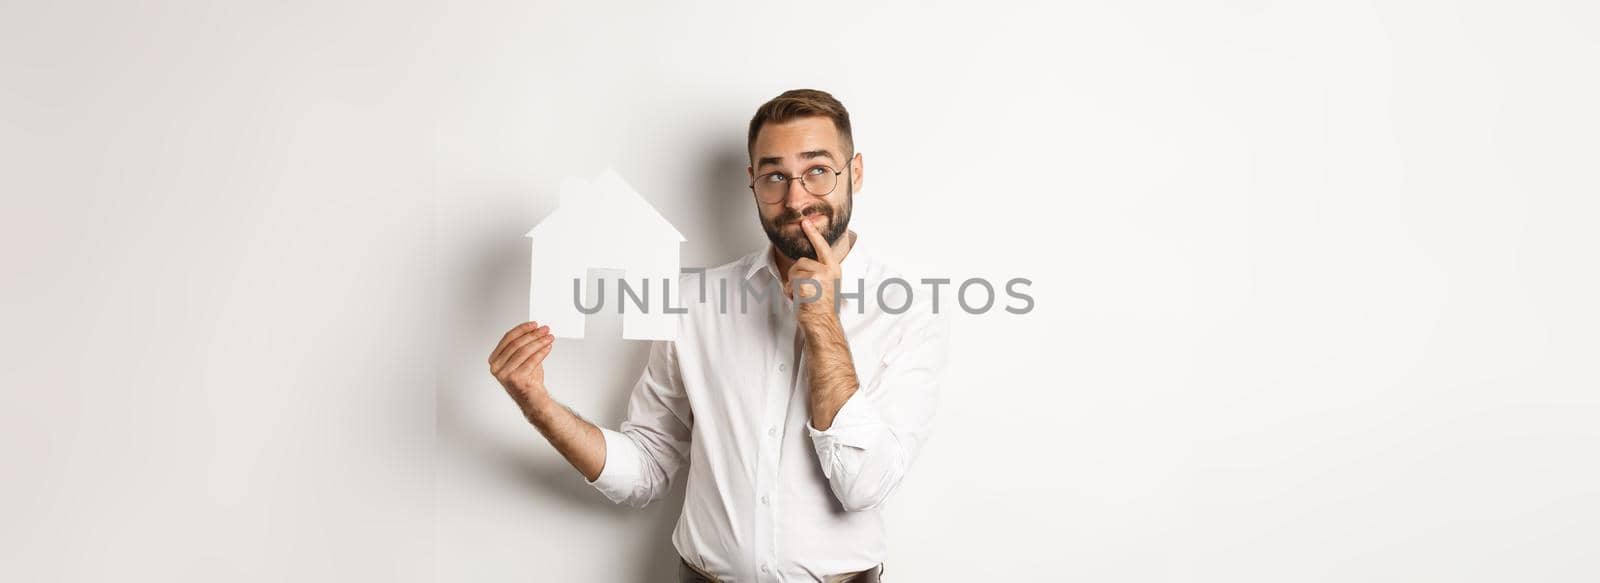 Real estate. Man thinking while searching for apartment, holding paper house model, standing over white background.